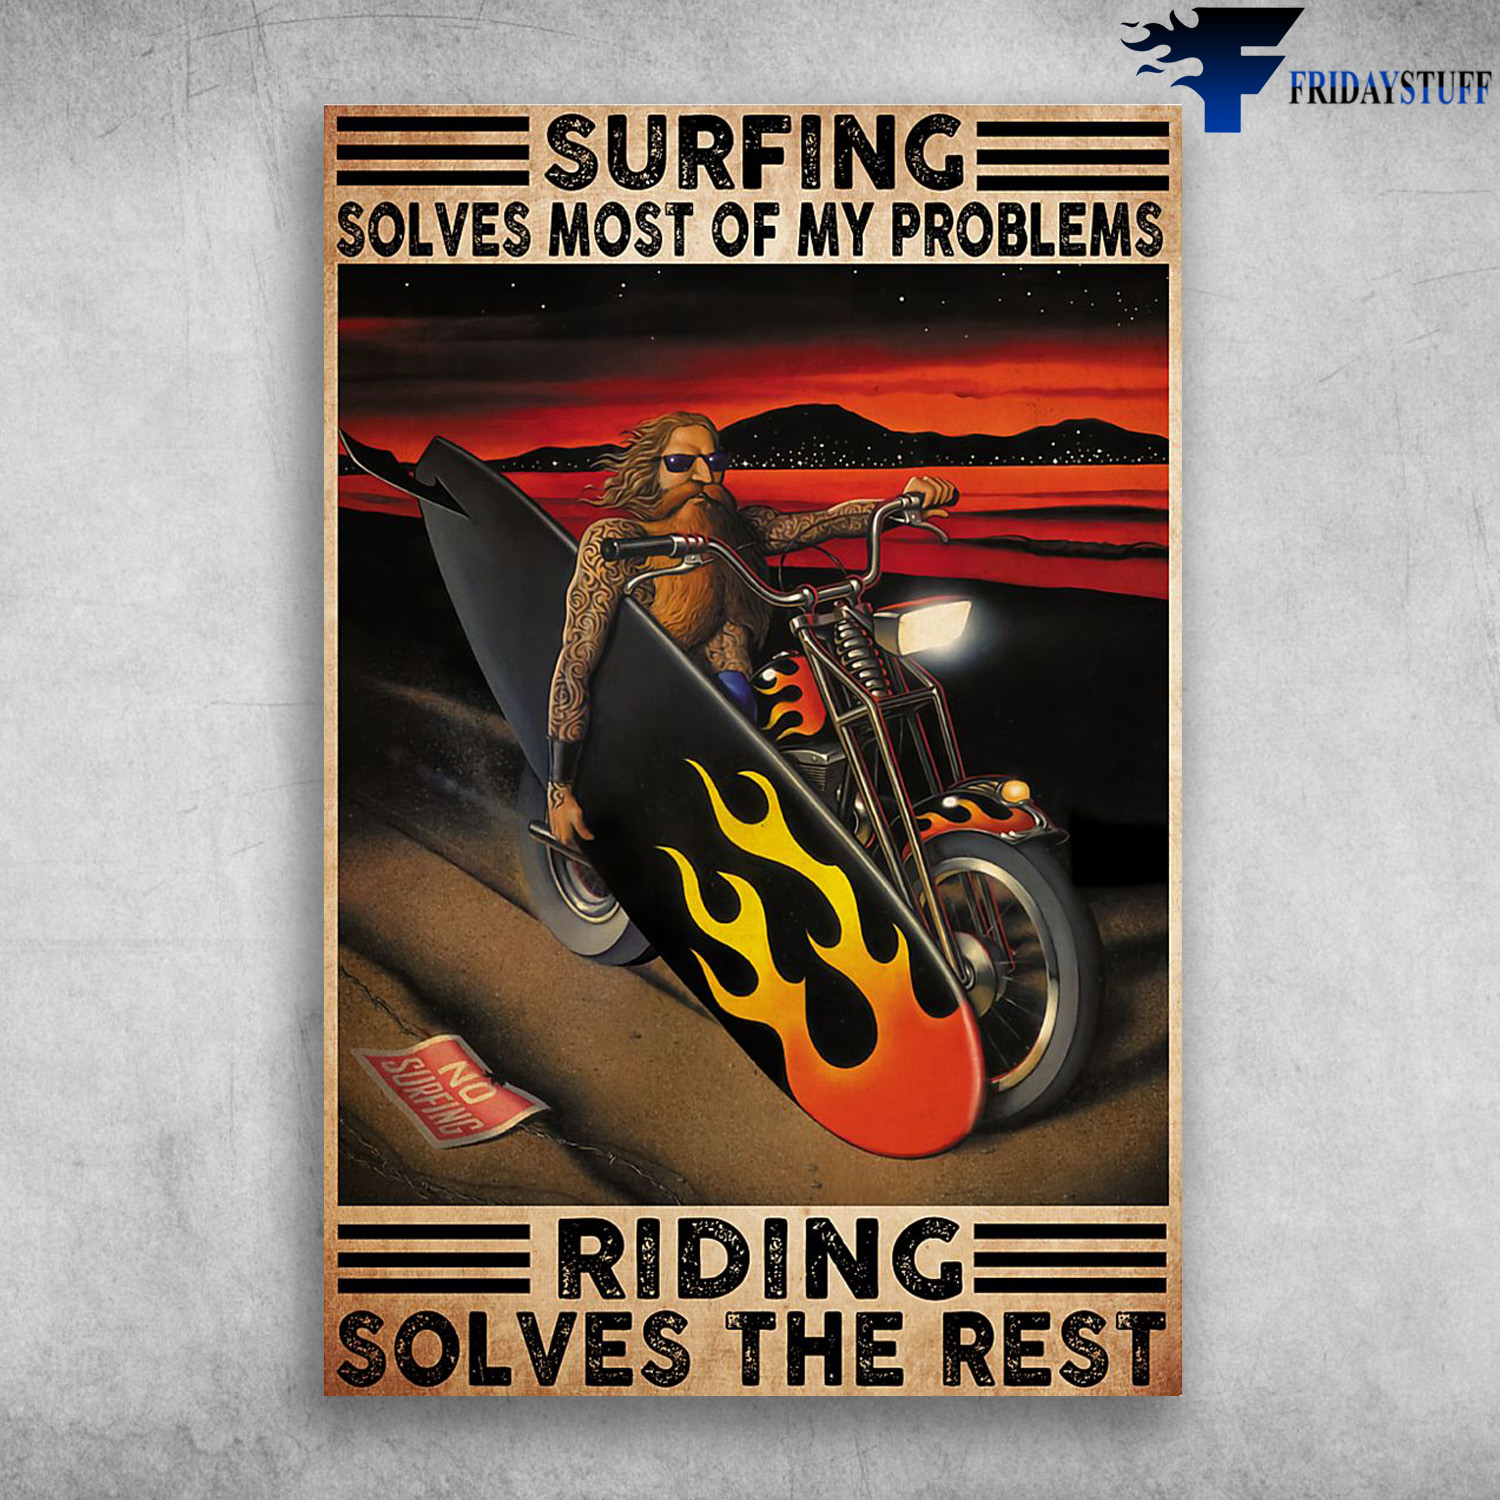 Tatooed Old Man Surfing Motorcycle - Surfing Solves Most Of My Problems, Riding Solves The Rest